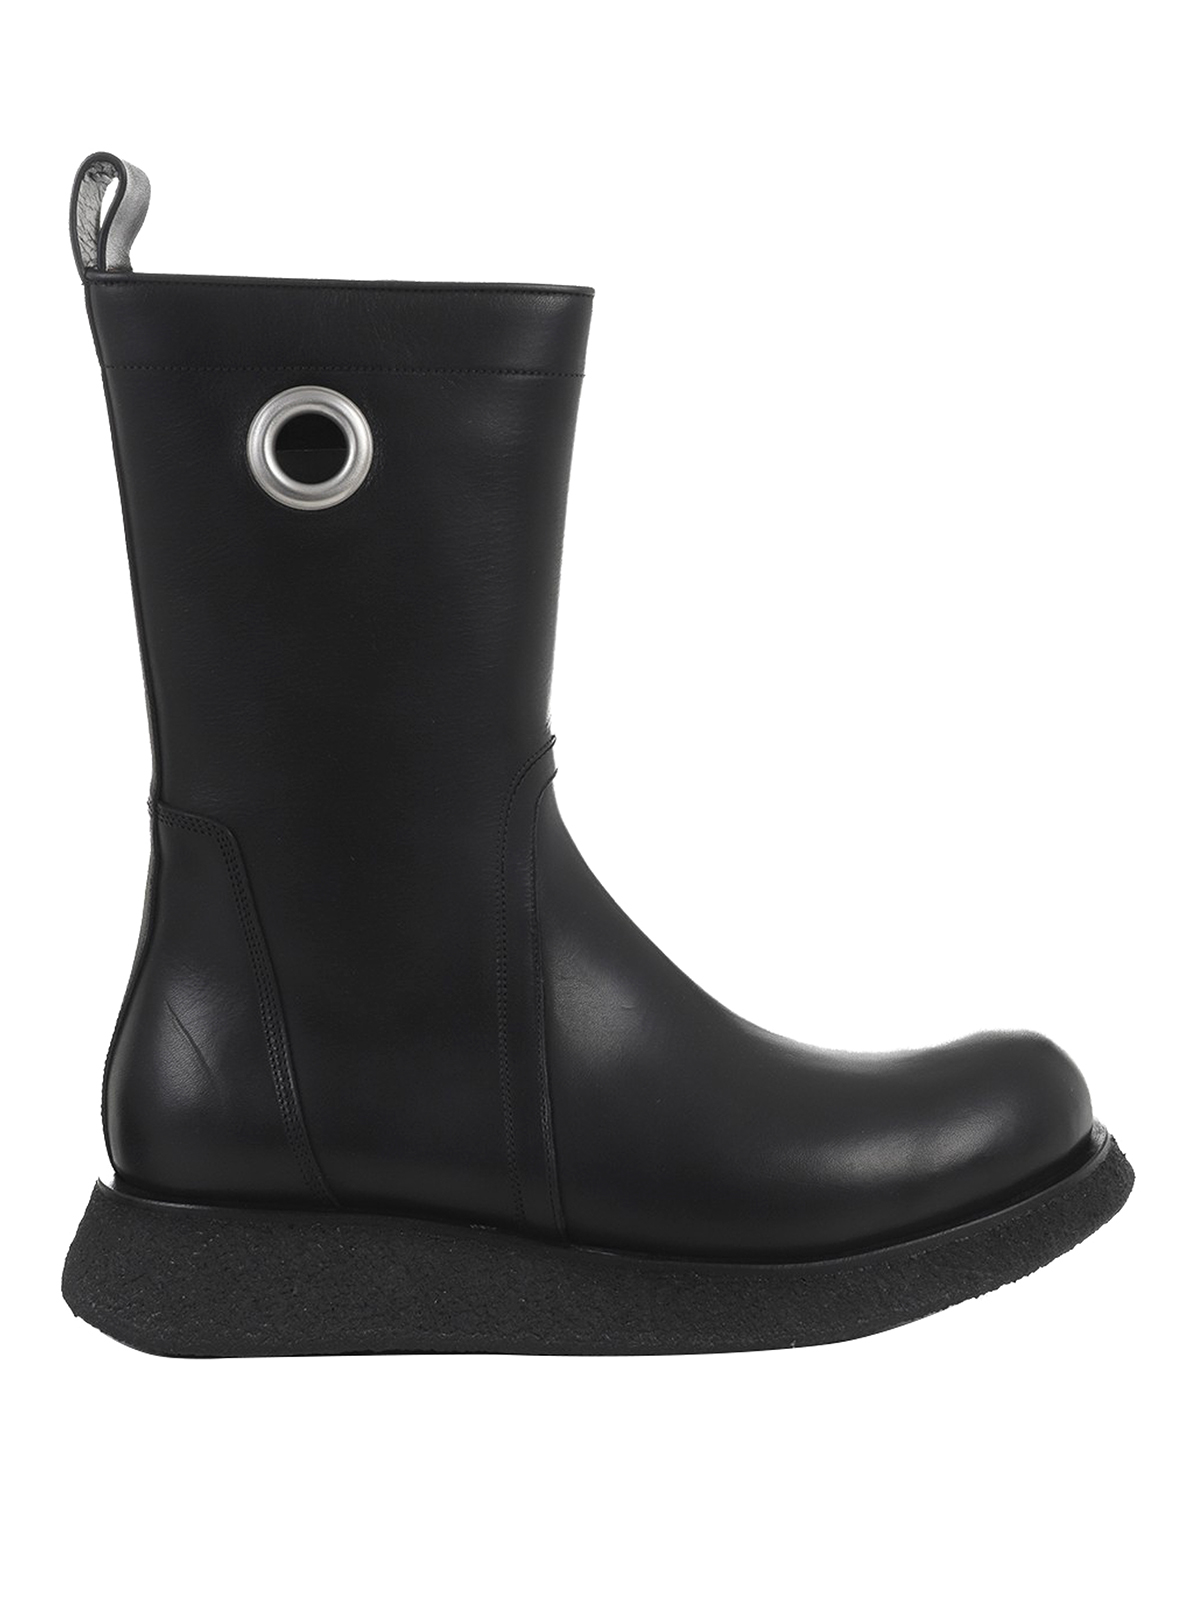 RICK OWENS BOOTS WITH EYELET